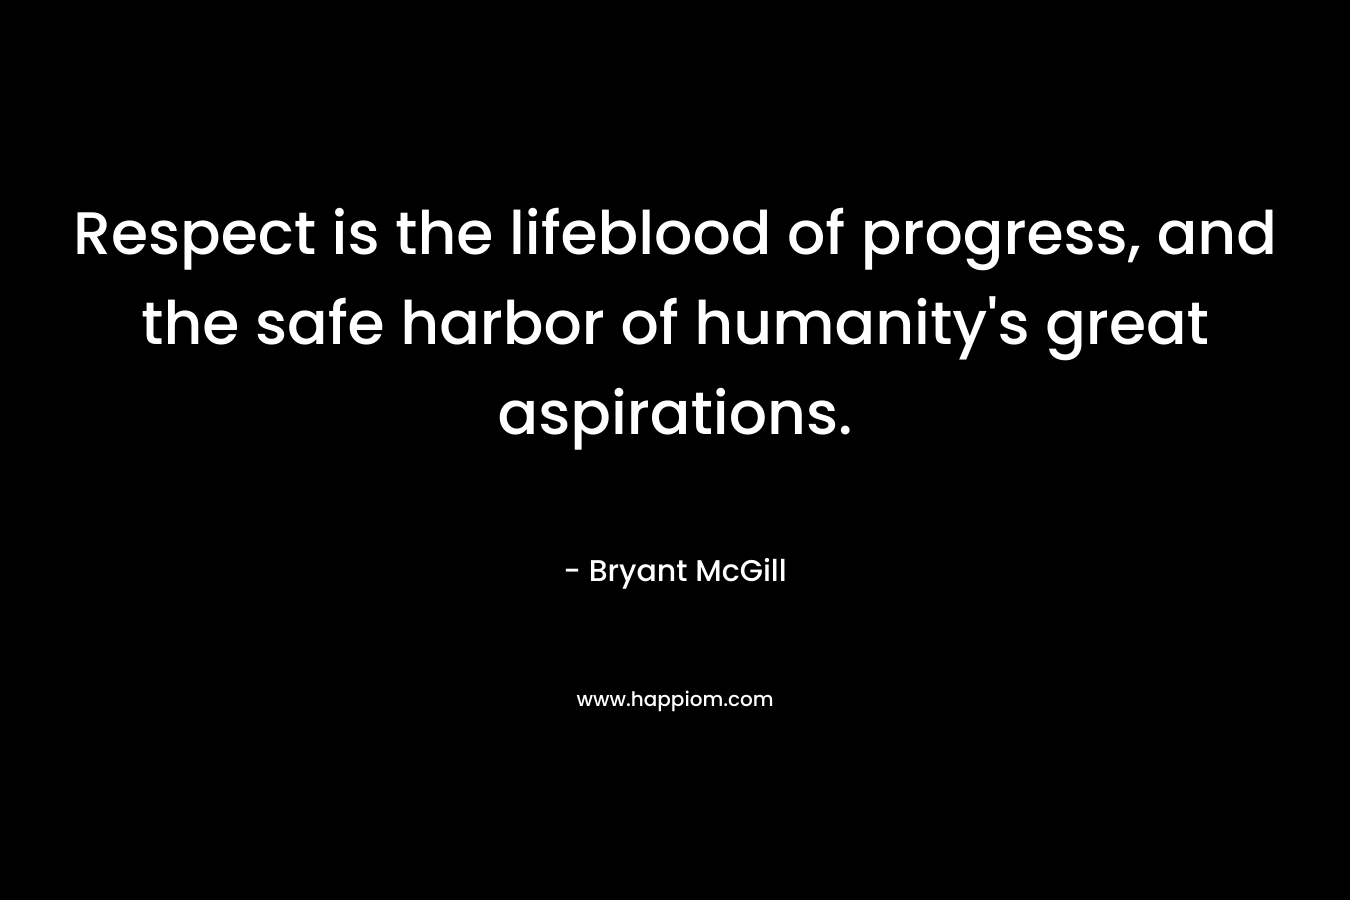 Respect is the lifeblood of progress, and the safe harbor of humanity’s great aspirations. – Bryant McGill